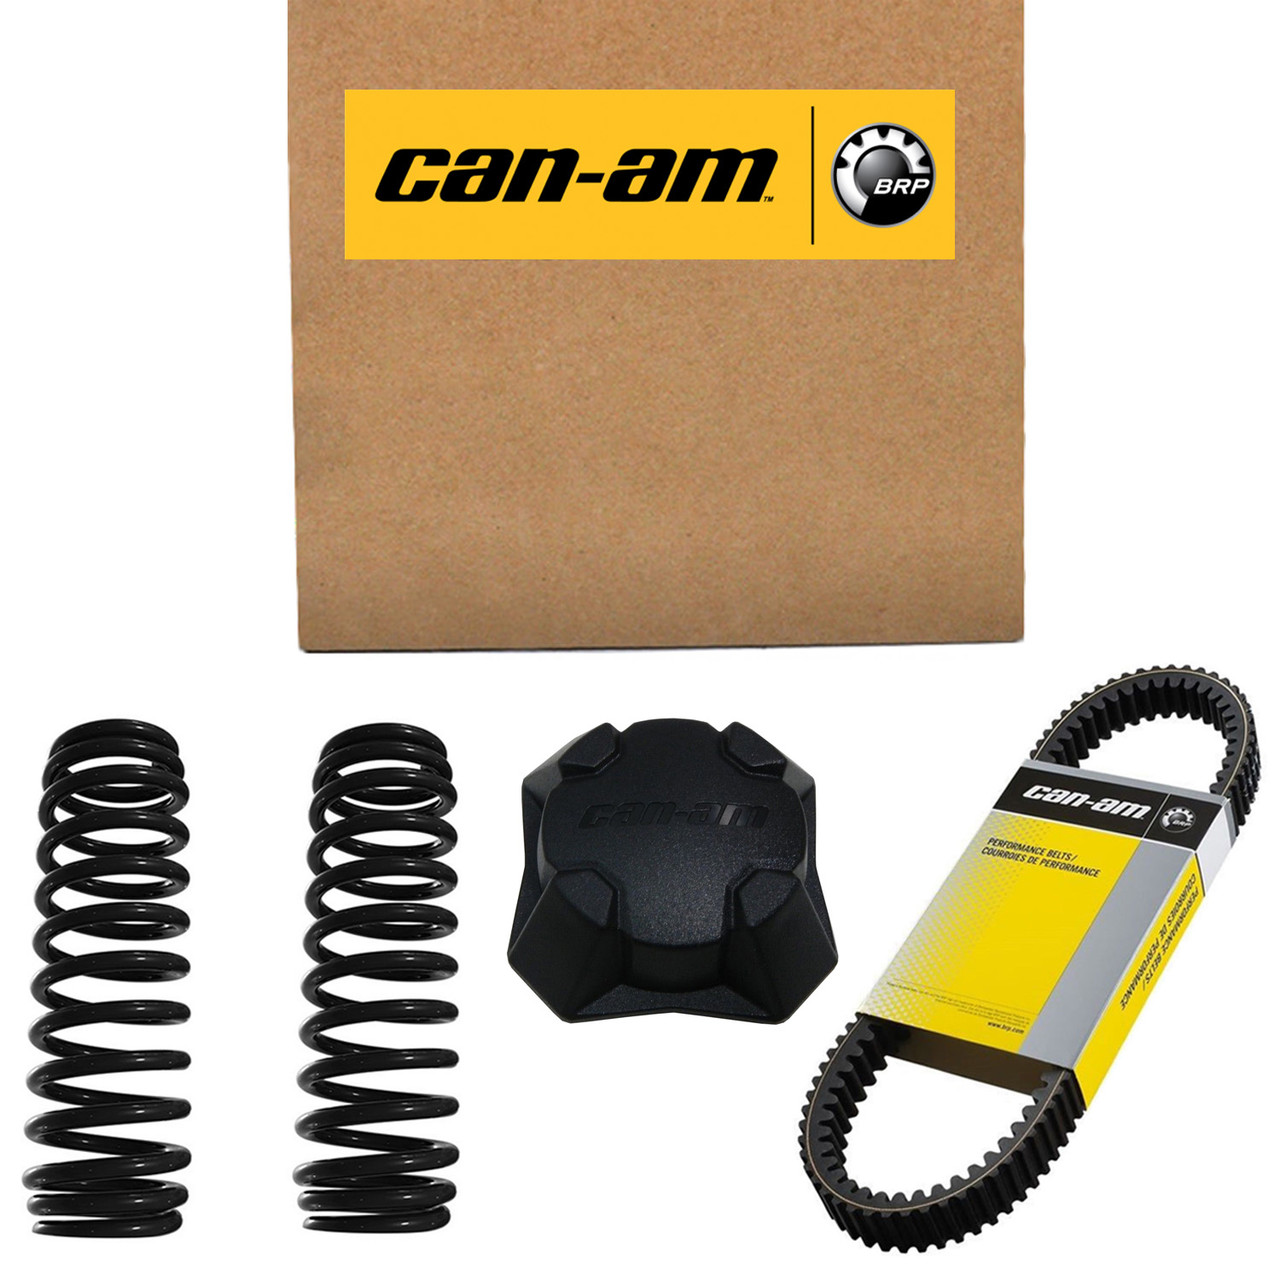 Can-Am New OEM Electronic Box, 420666569